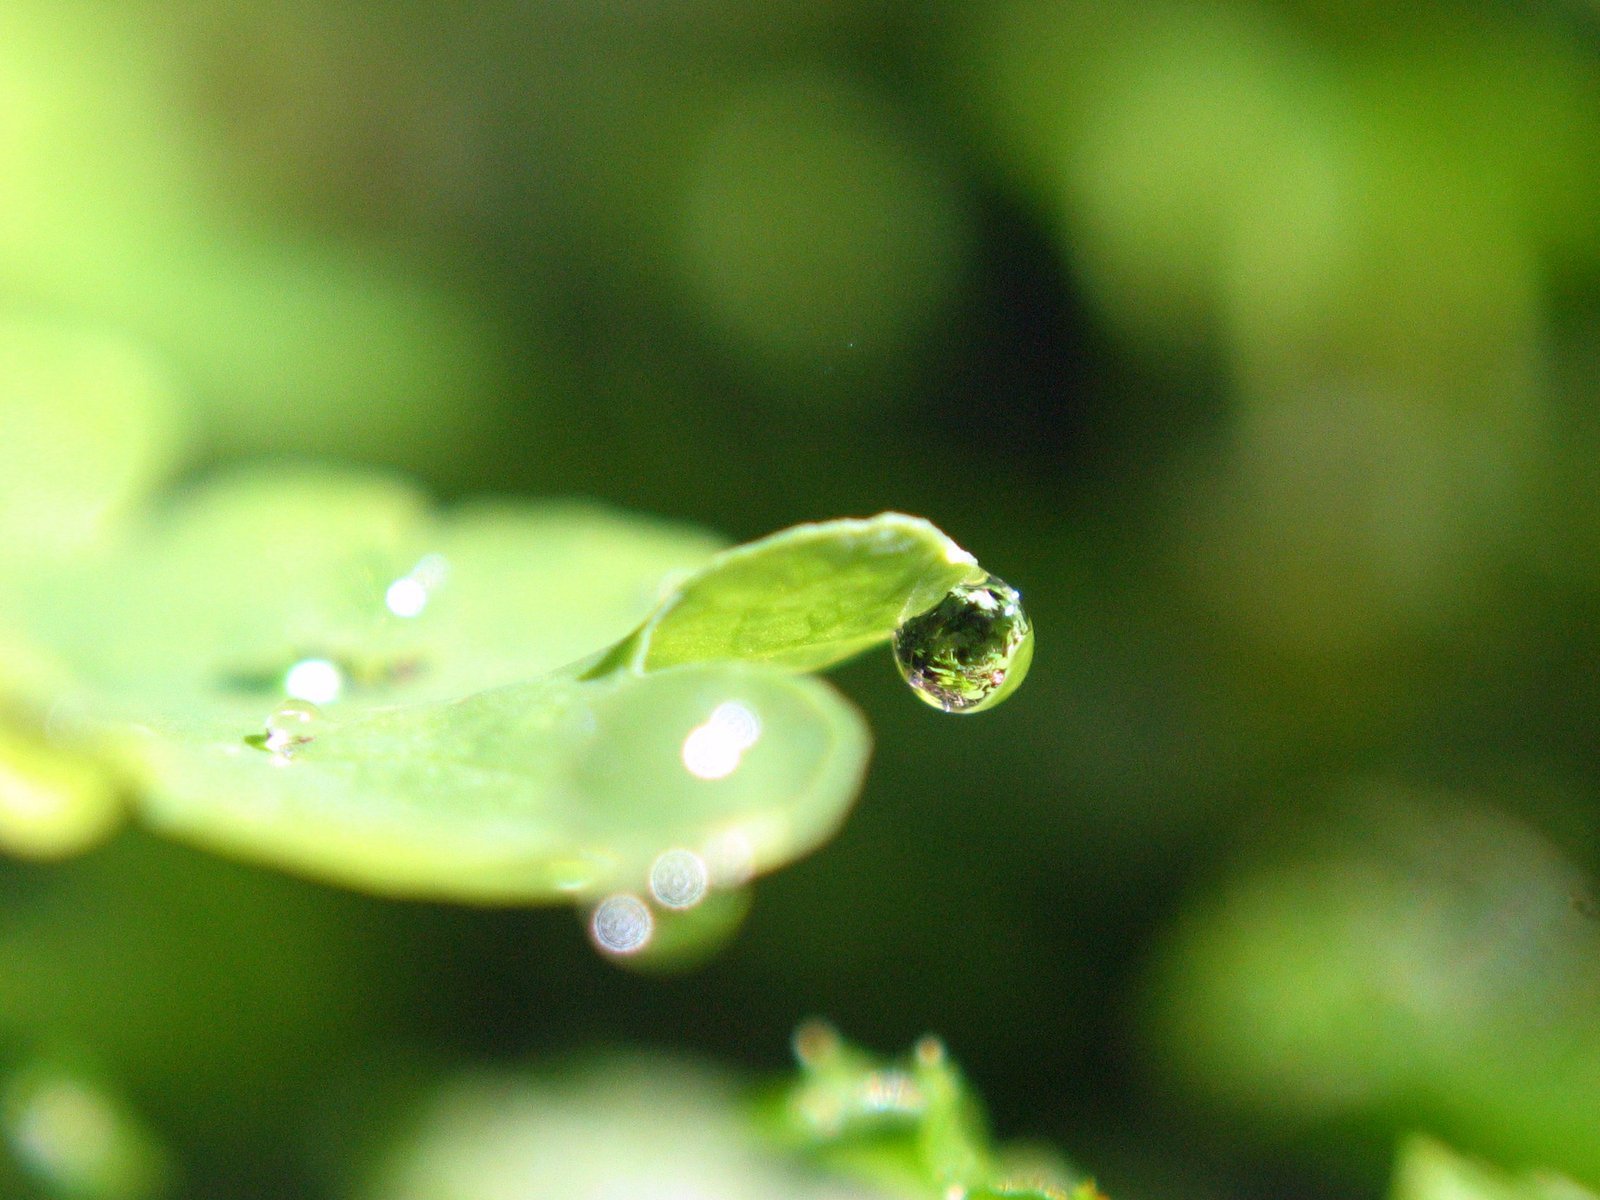 an image of a water droplet attached to leaves